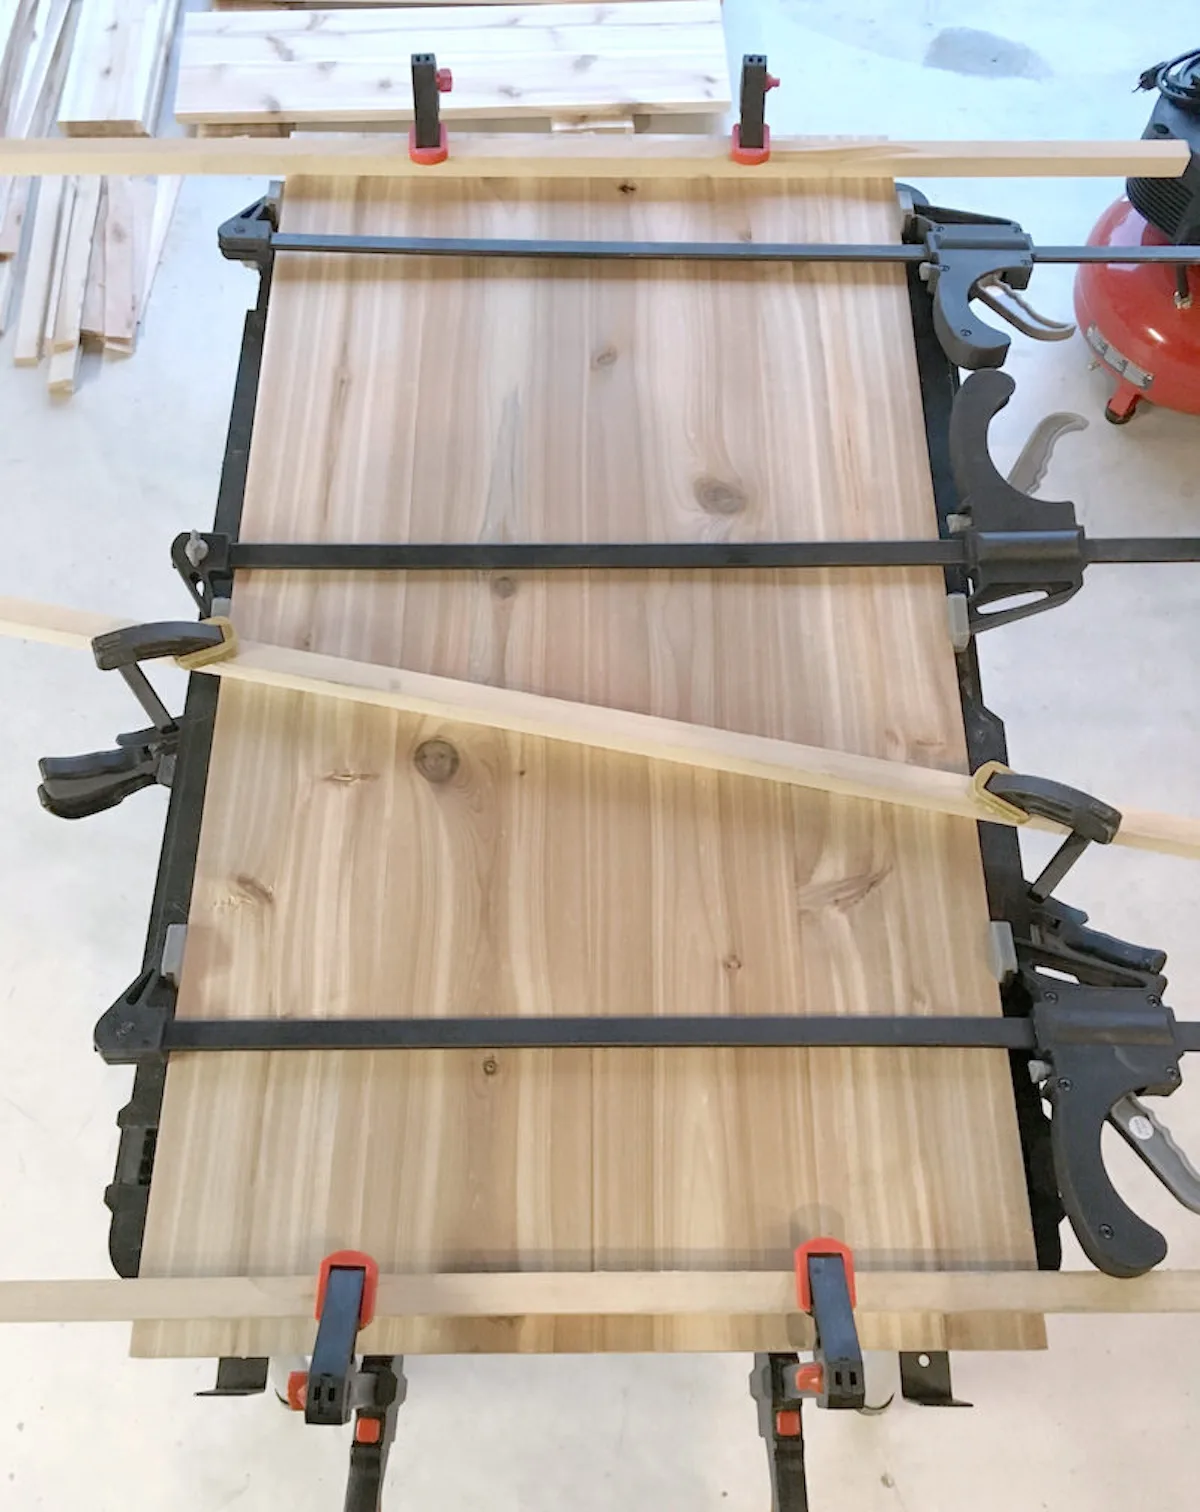 Bar clamps holding side planks